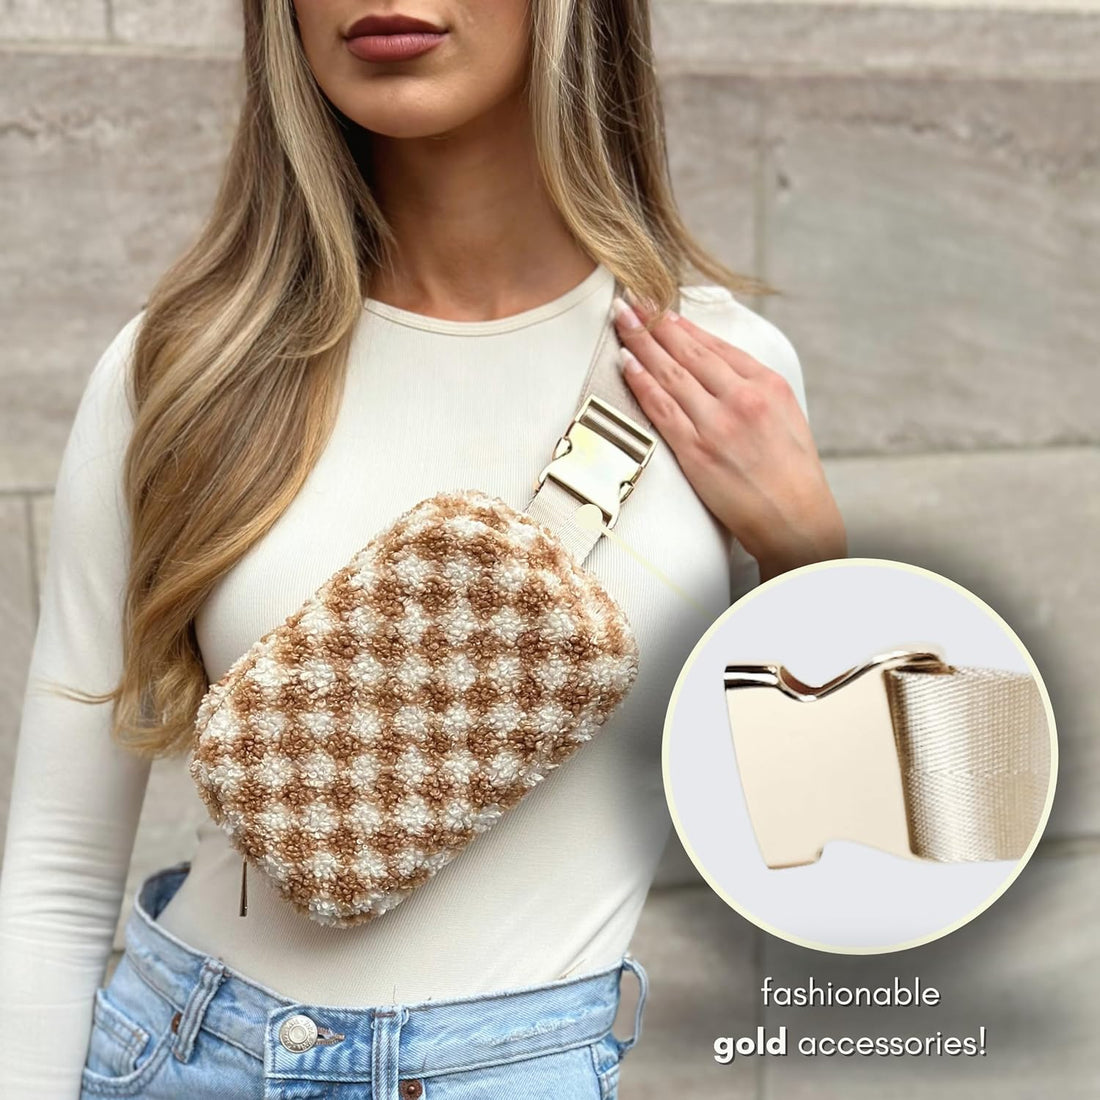 Boutique Fleece Belt Bag | Sherpa Crossbody Bag Fanny Pack for Women Fashionable | Cute Mini Everywhere Bum Hip Waist Pack | Small Fashion Travel Chest Bag | Gold Silver Accessories | Adjustable Strap, Tan Checkered Fleece, Extended Strap Length